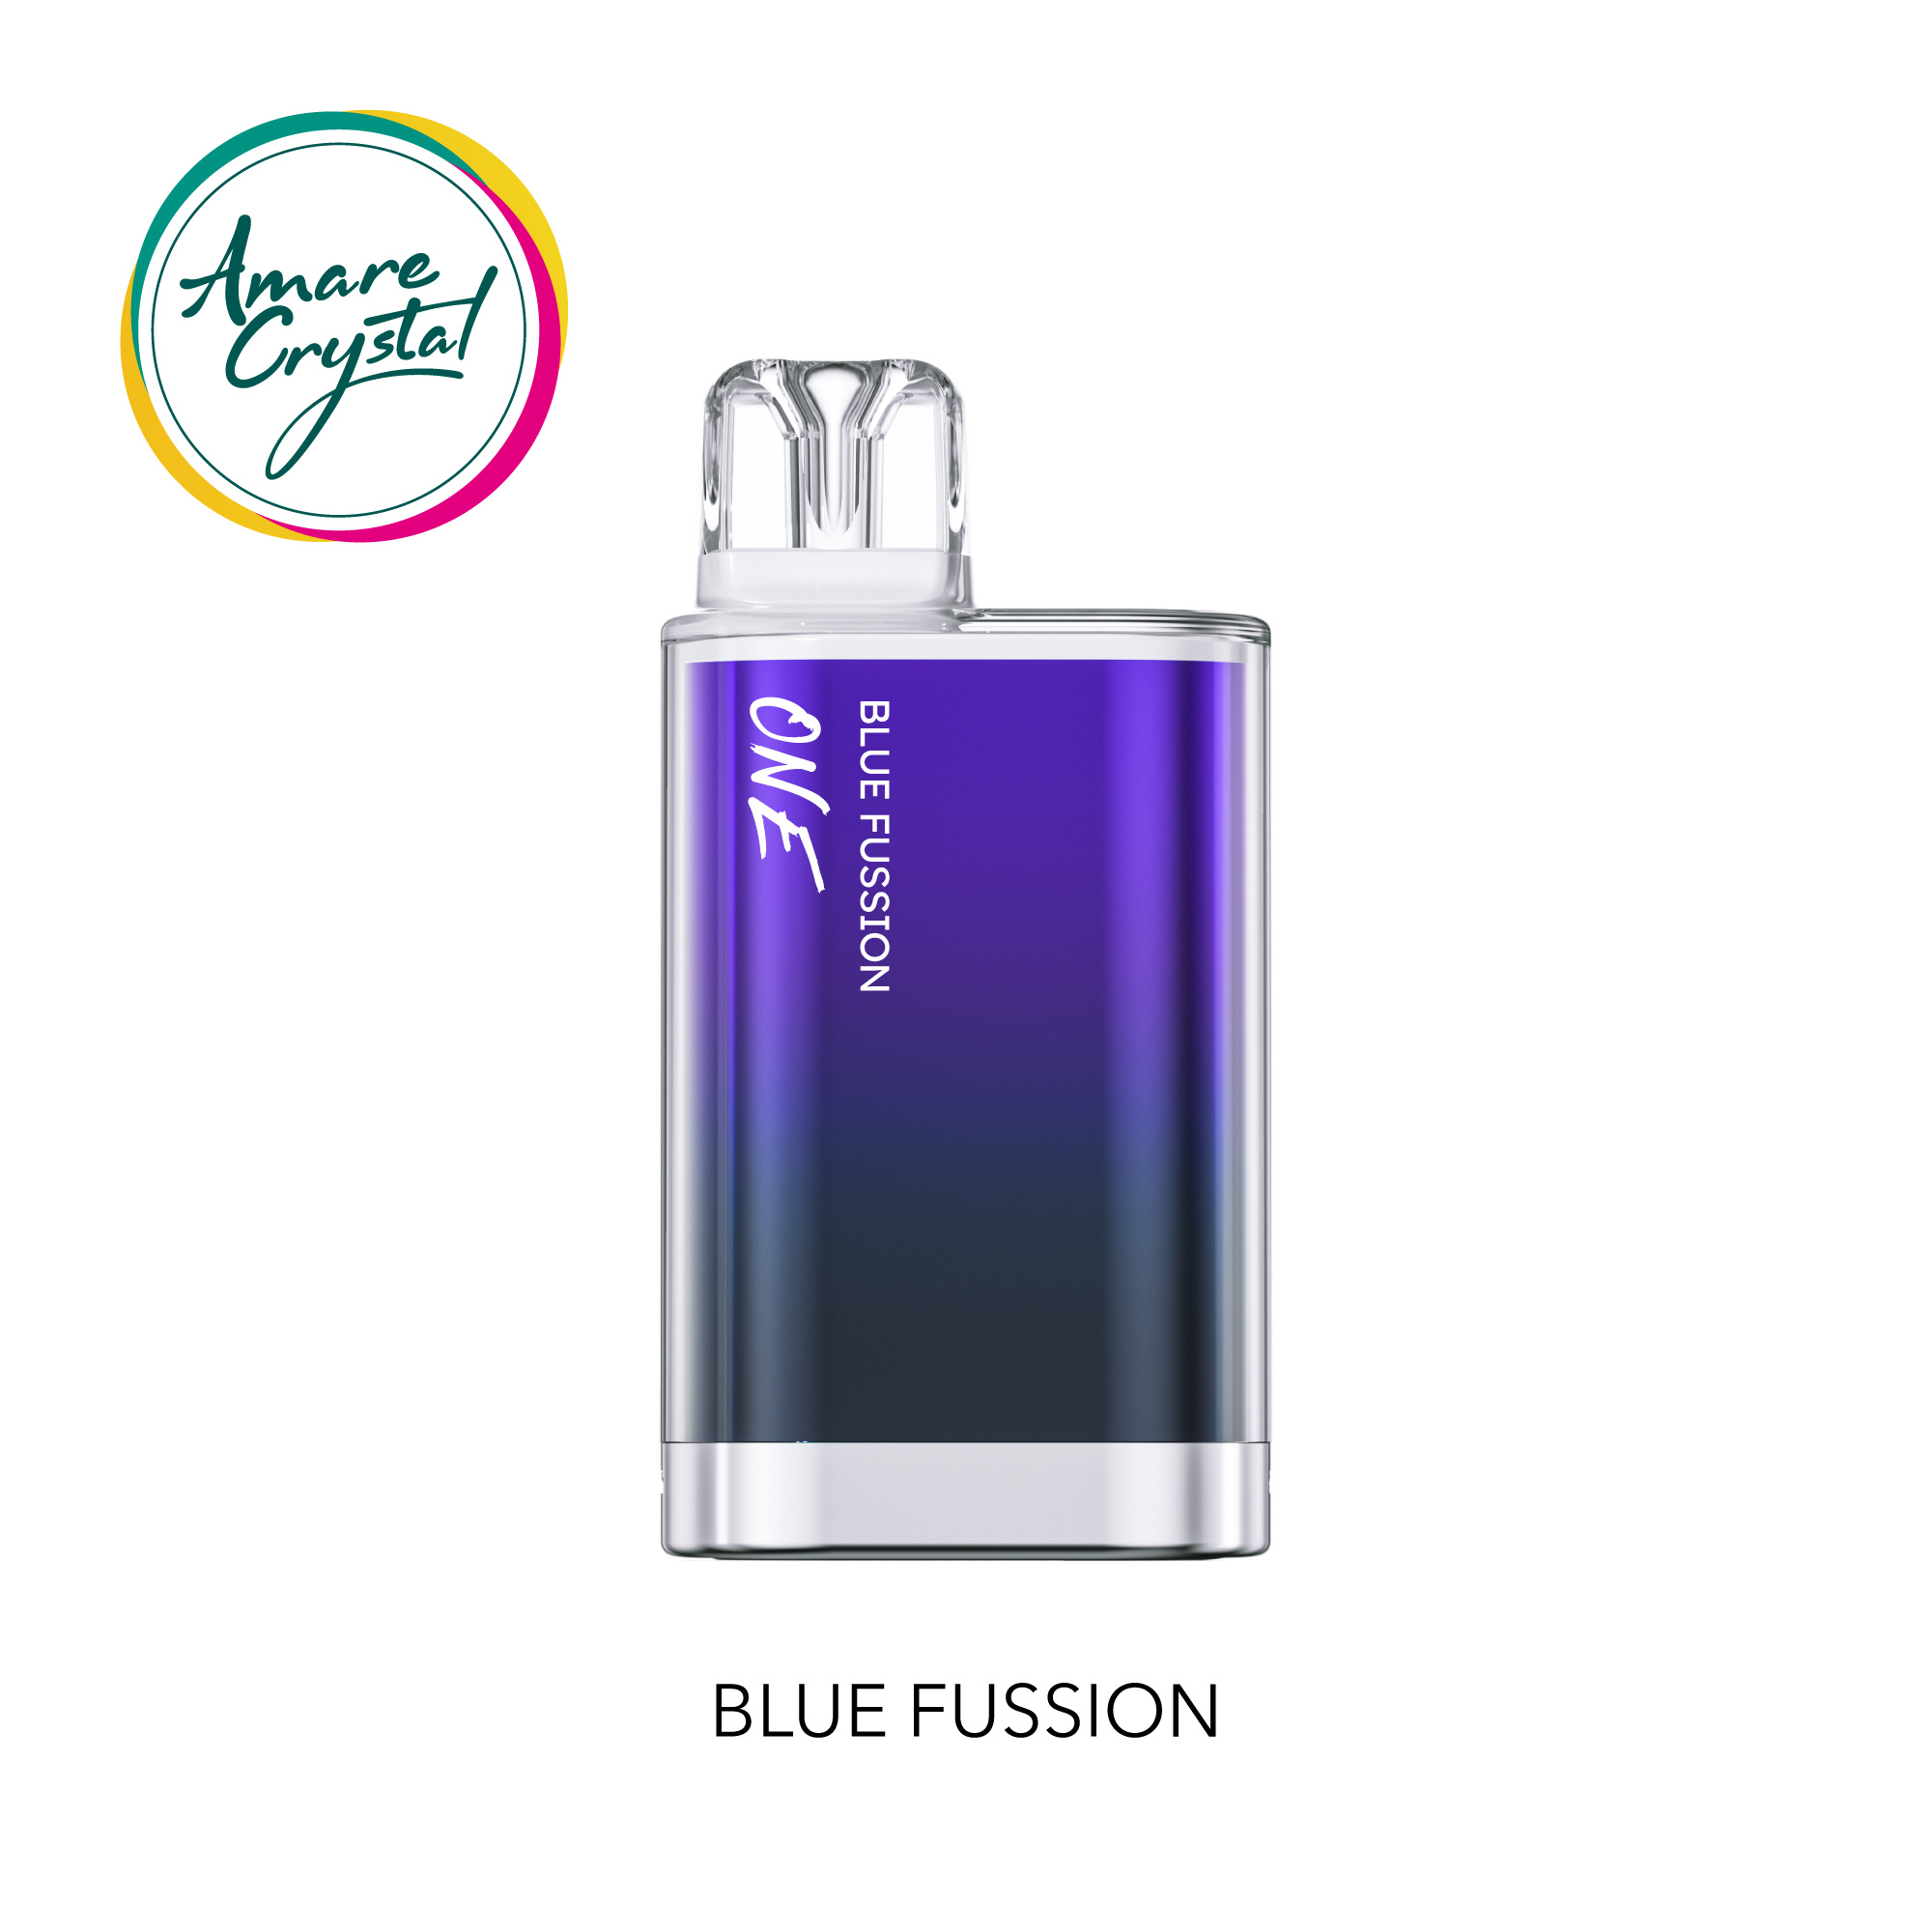 Amare Crystal One - Blue Fusion